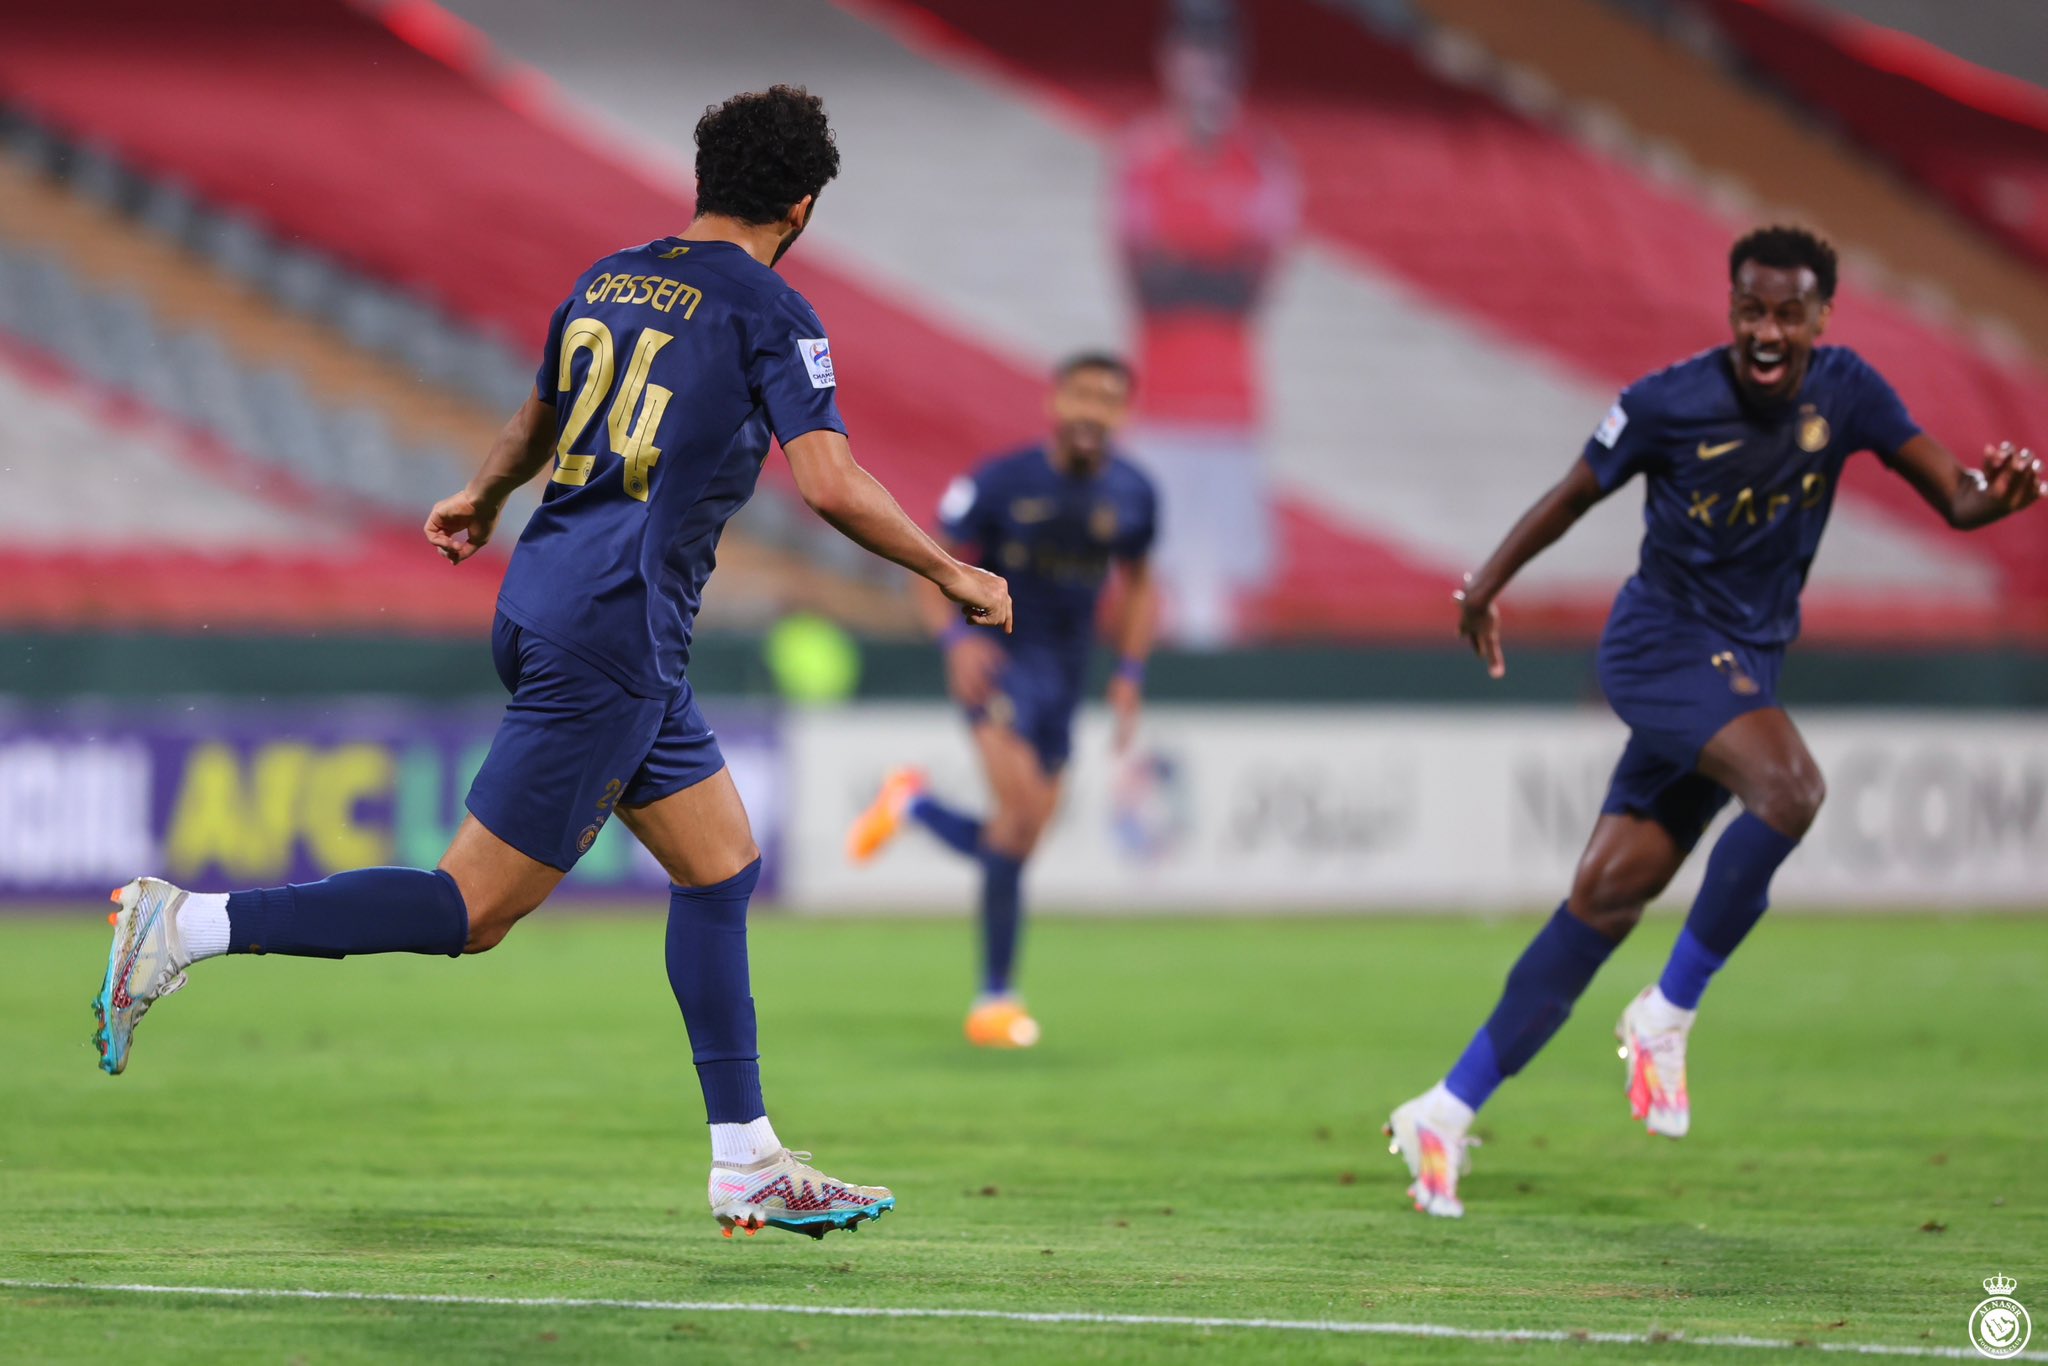 Ronaldo helps Al Nassr get off to a good start in the AFC Champions League - Football